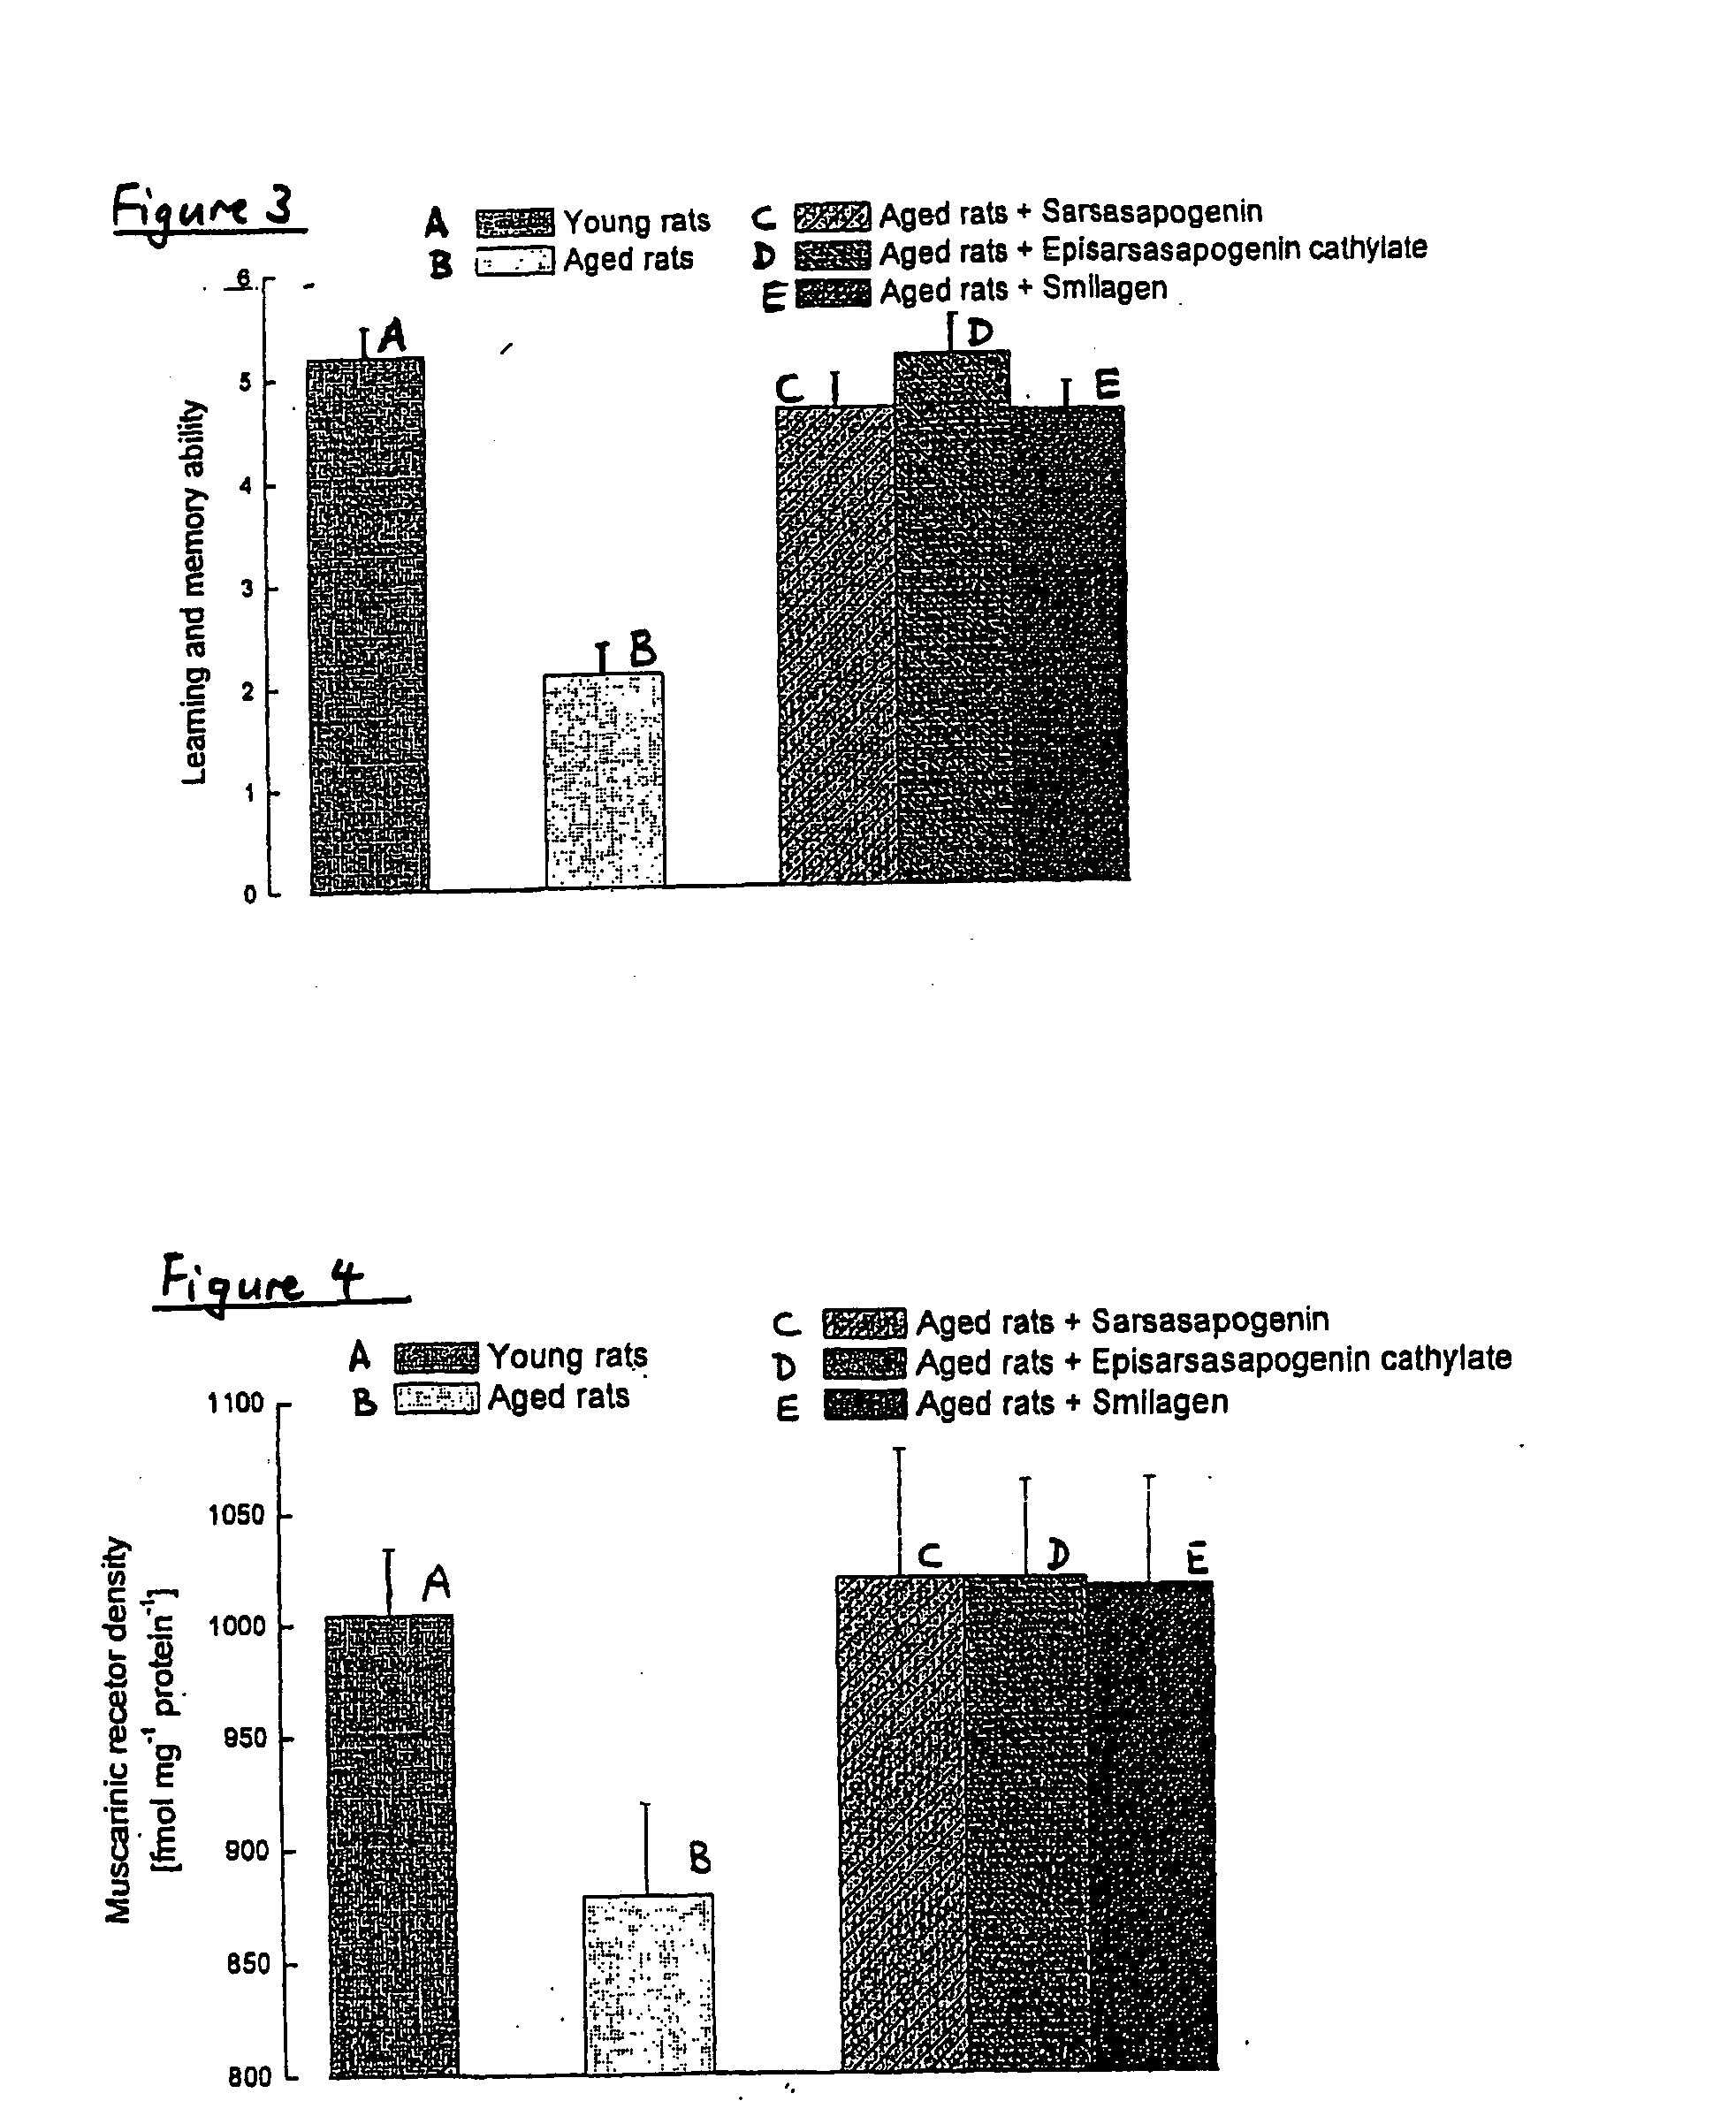 Therapeutic methods and uses of sapogenins and their derivatives